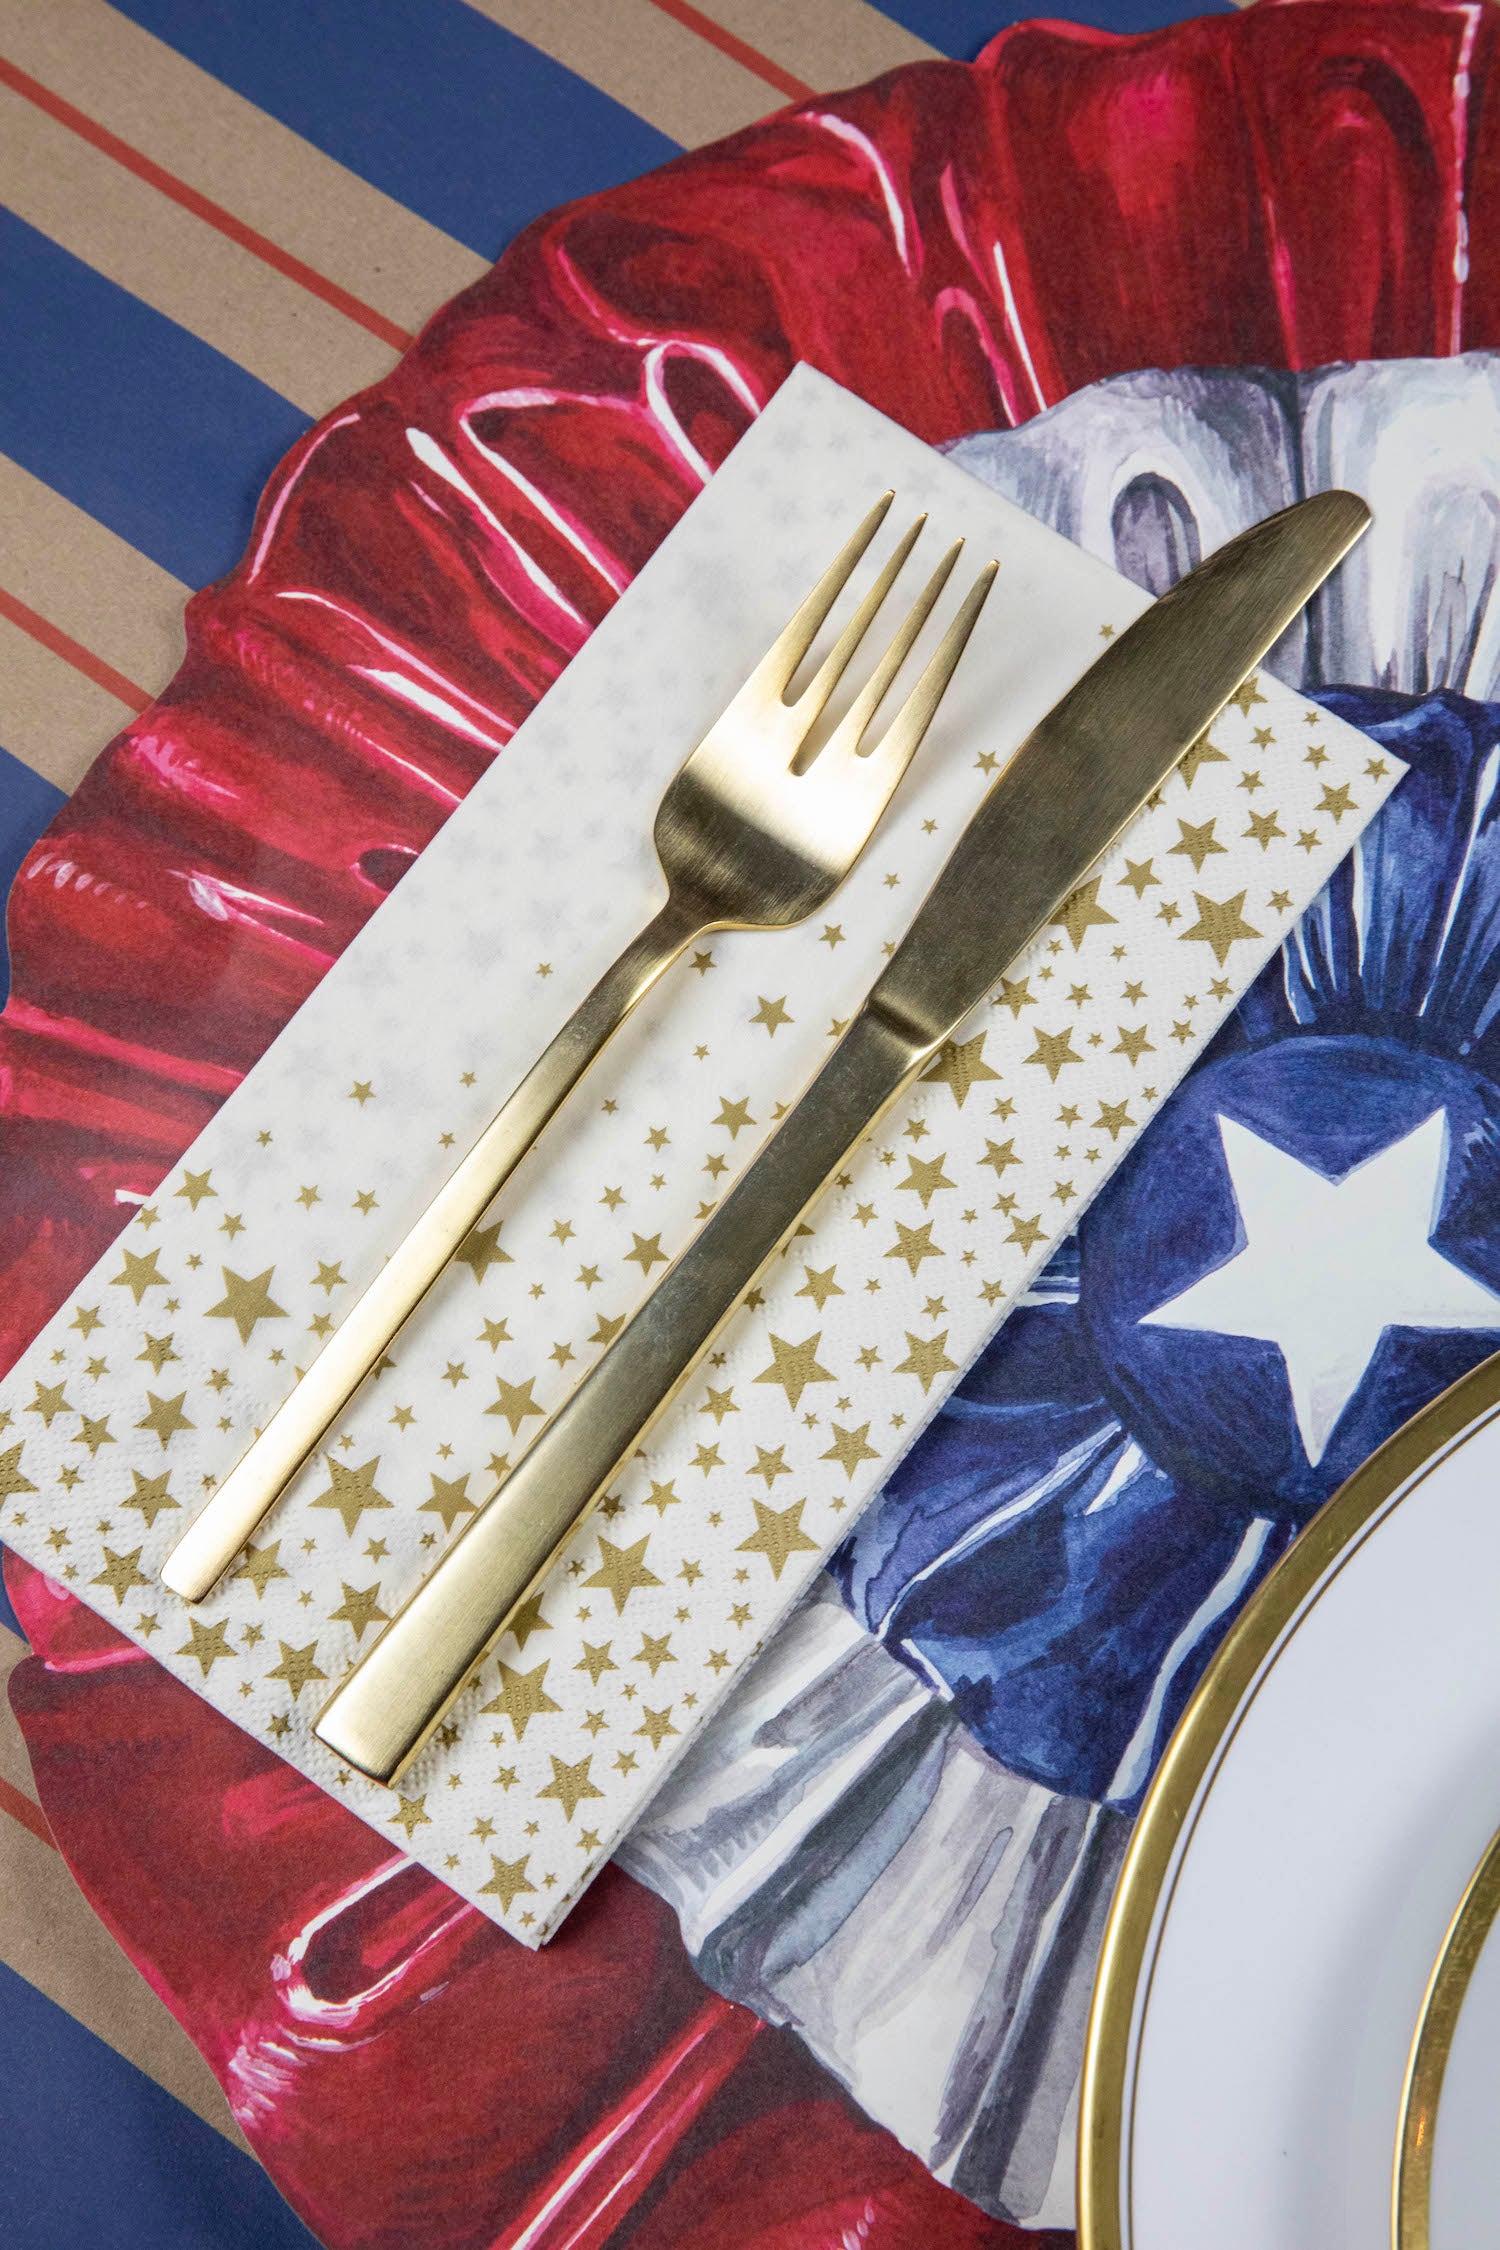 A Shining Star Guest Napkin under the fork and knife of a patriotic place setting.